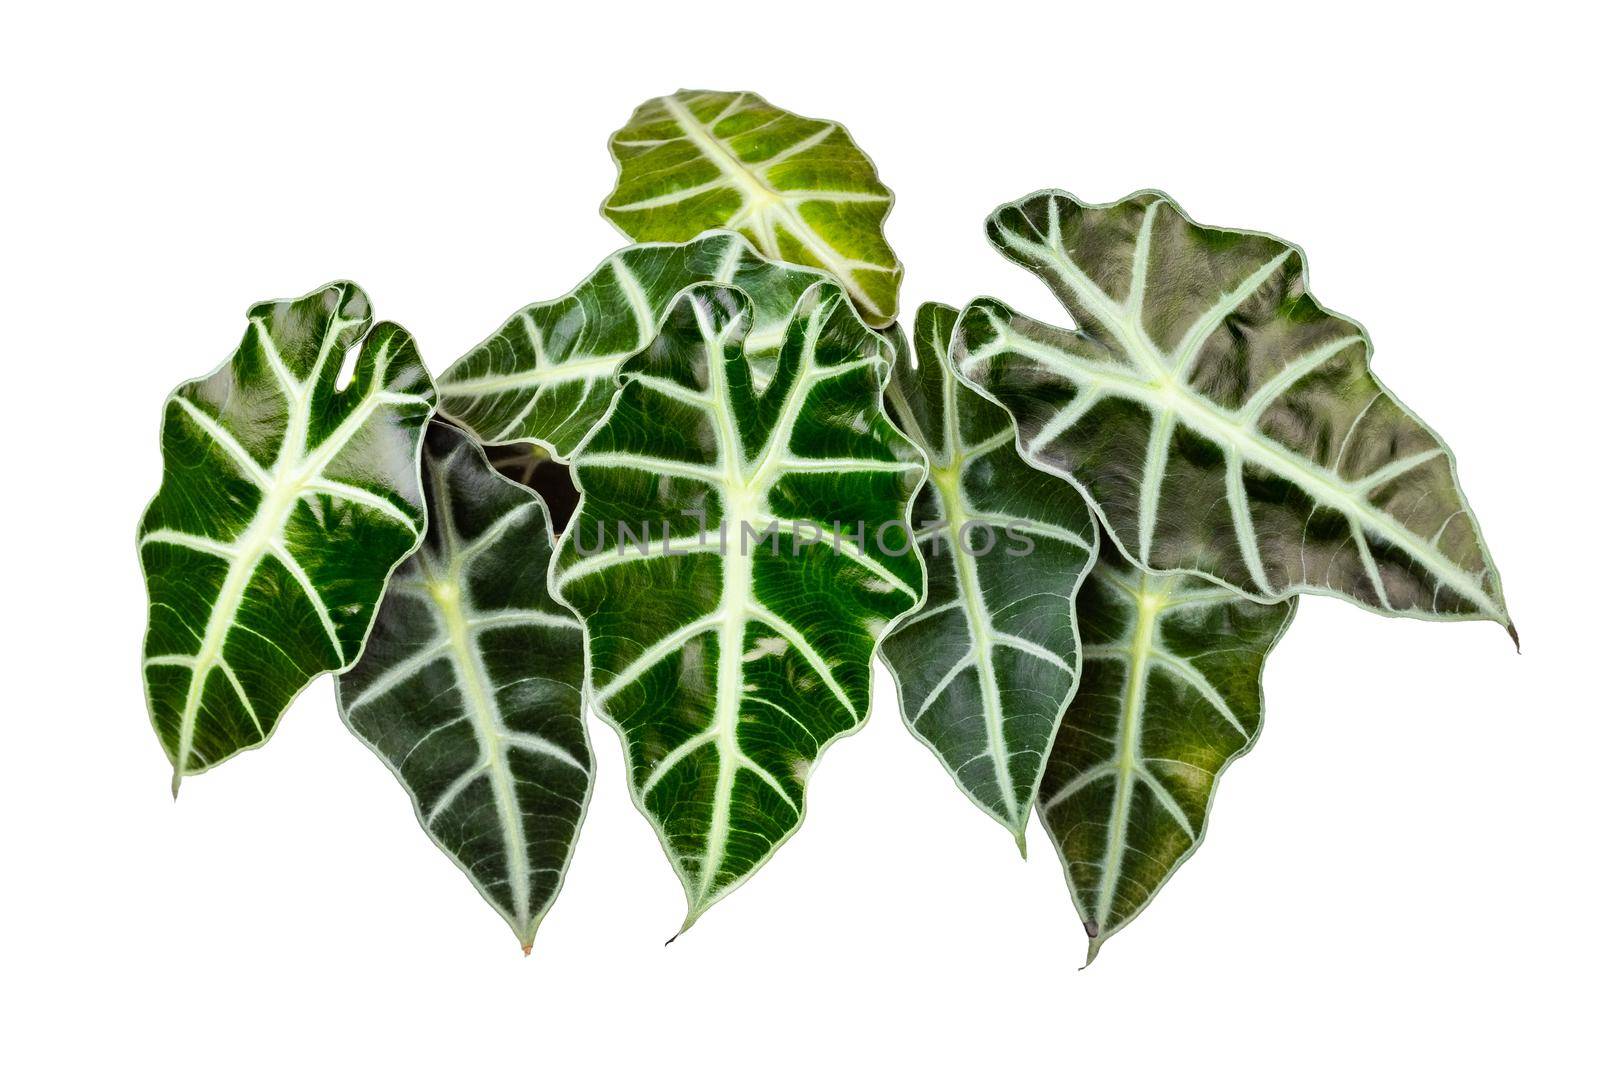 Alocasia Polly or Alocasia Amazonica and African Mask Plant leaves isolated on white background